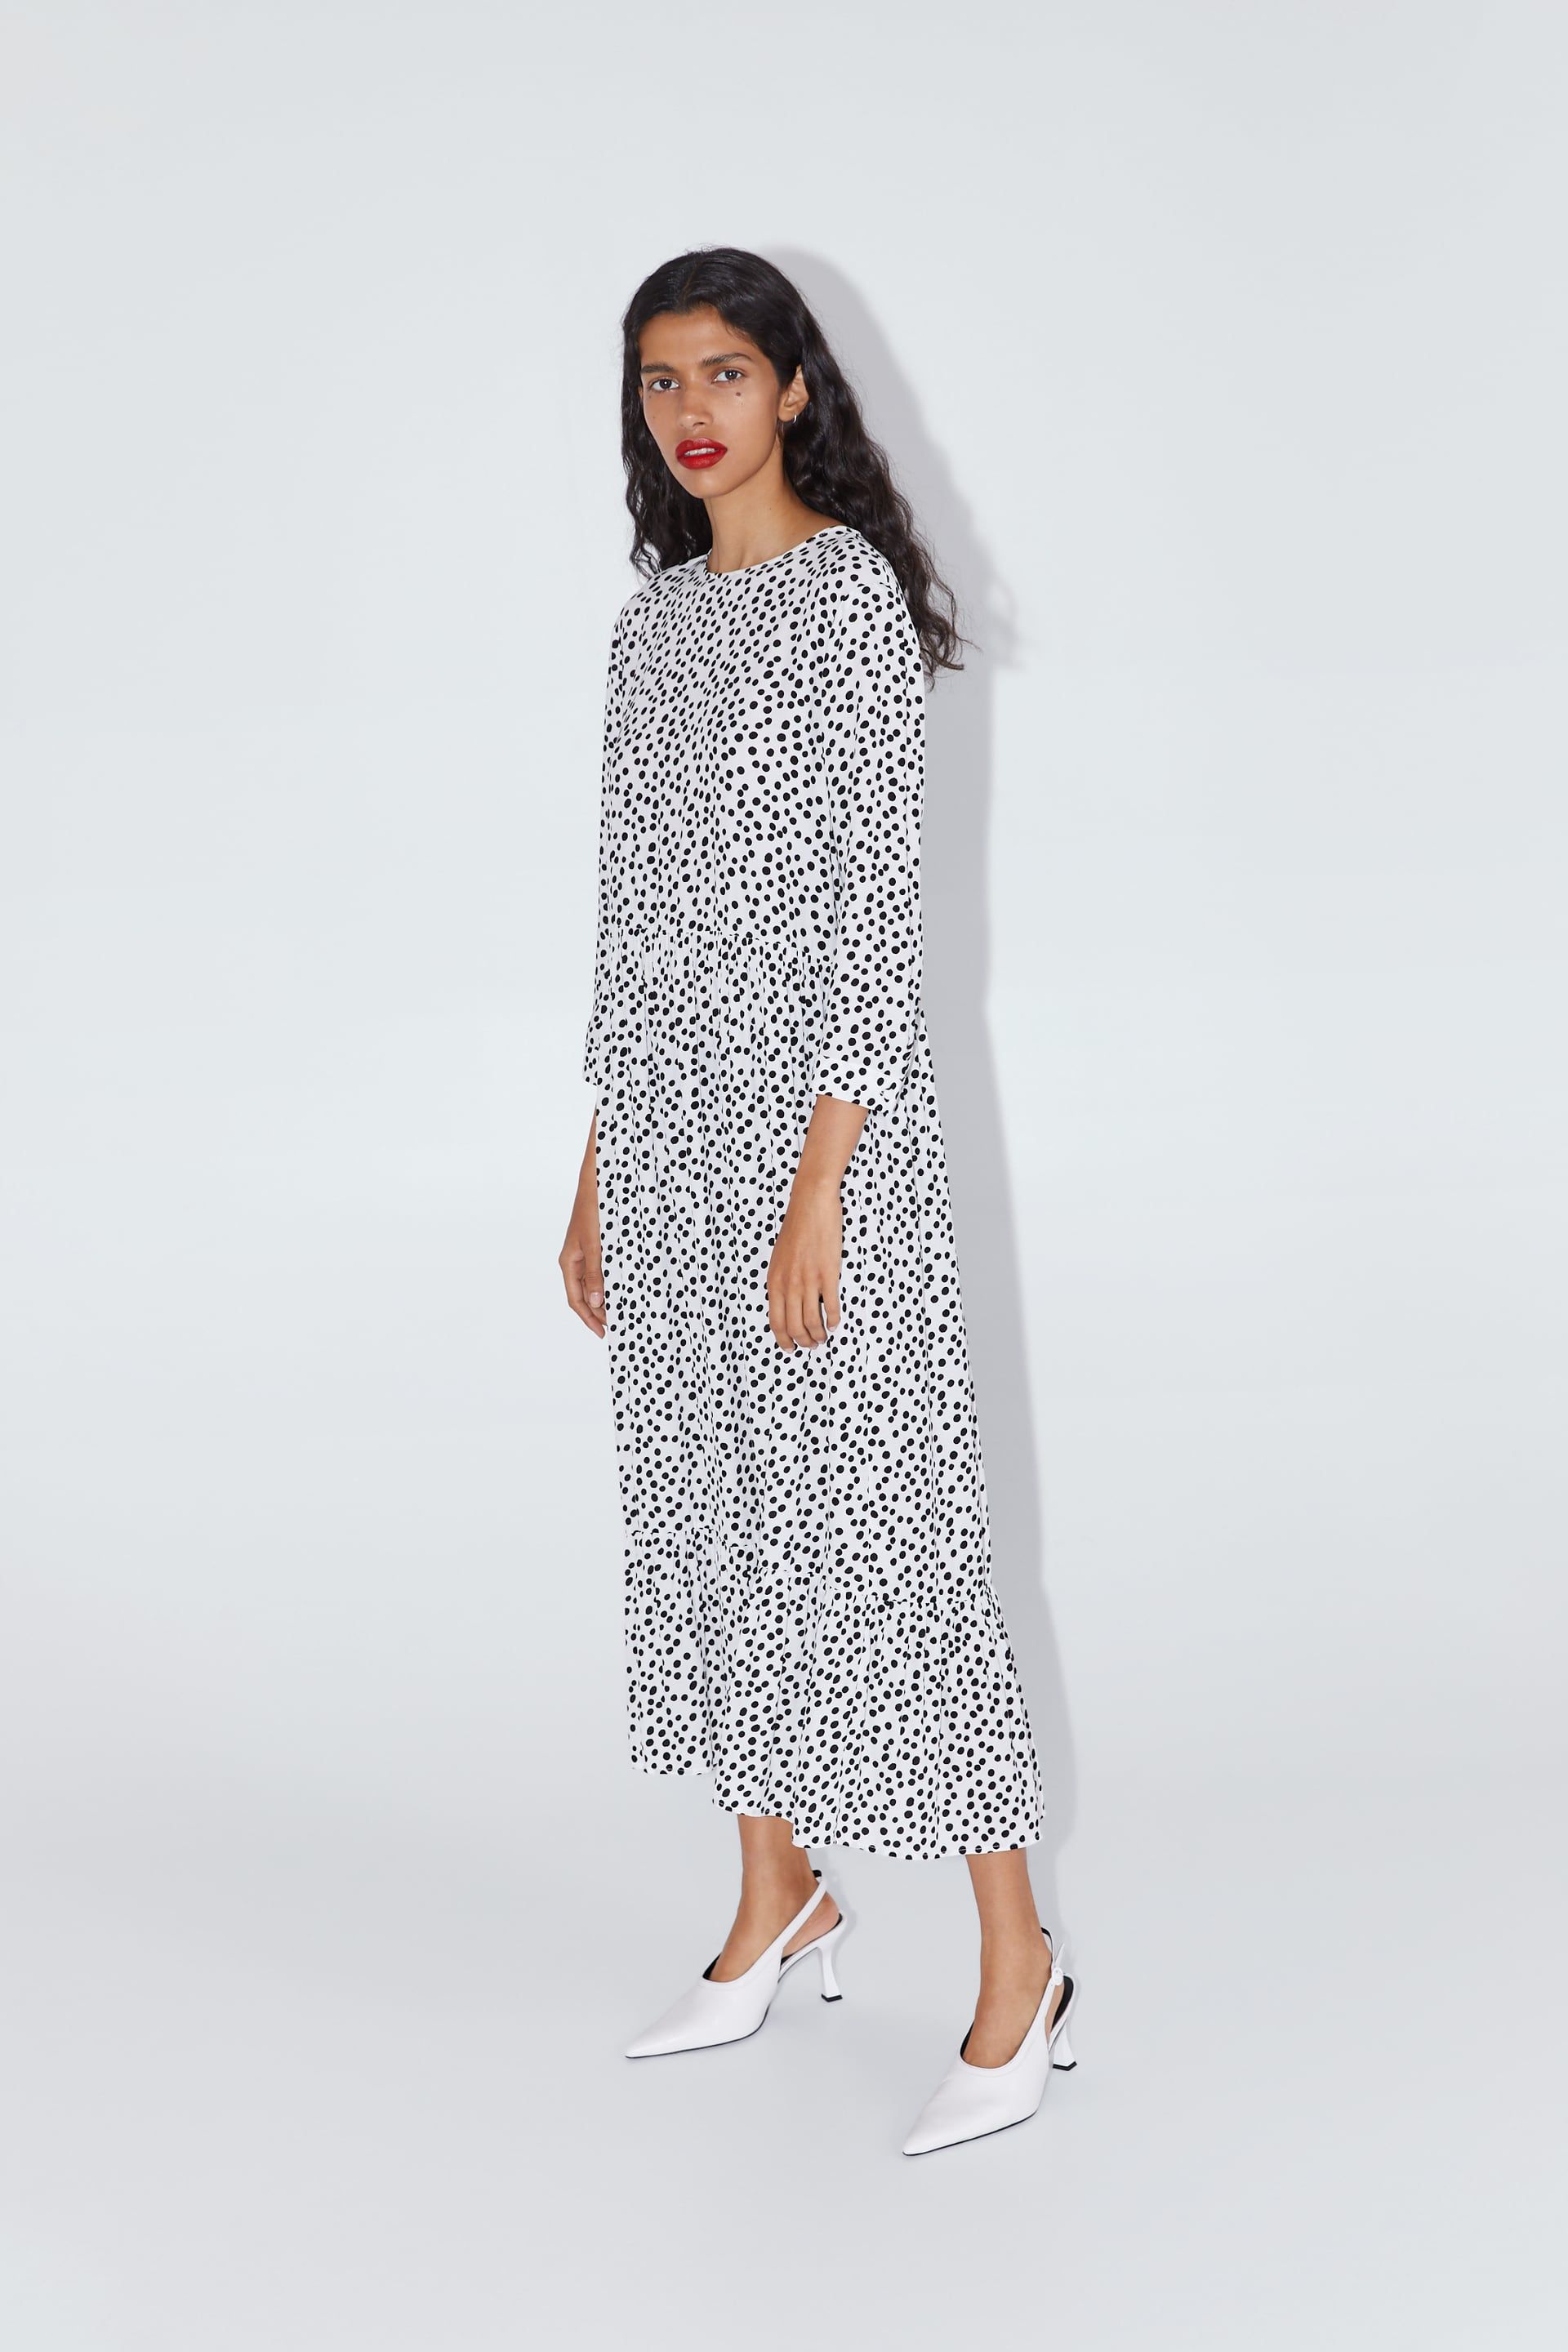 Zara Just Released The TikTok Dress In A New Colour | Glamour UK